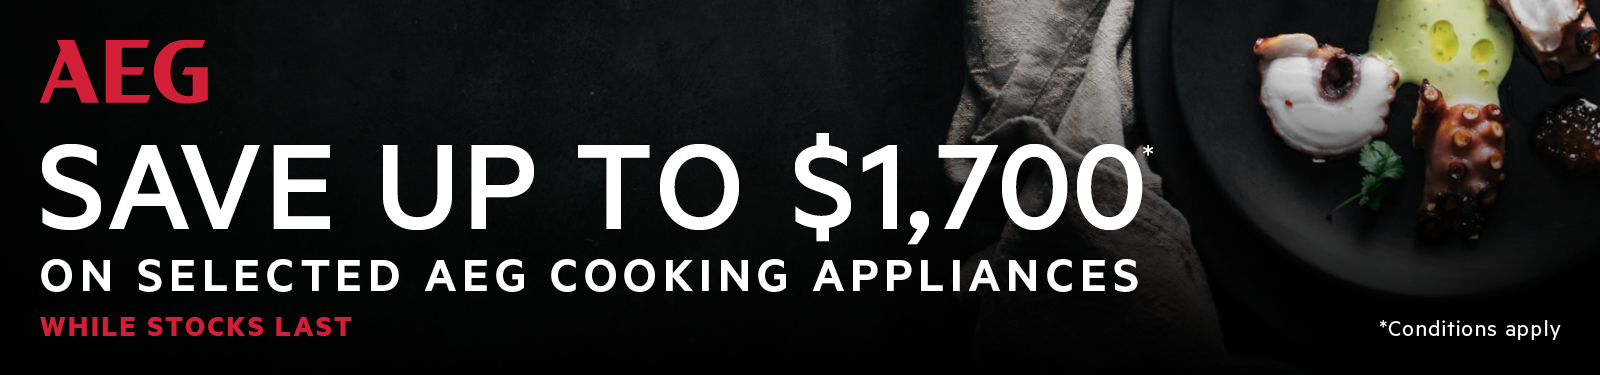 Save Up To $1700 On Selected AEG Cooking Appliances at Retravision